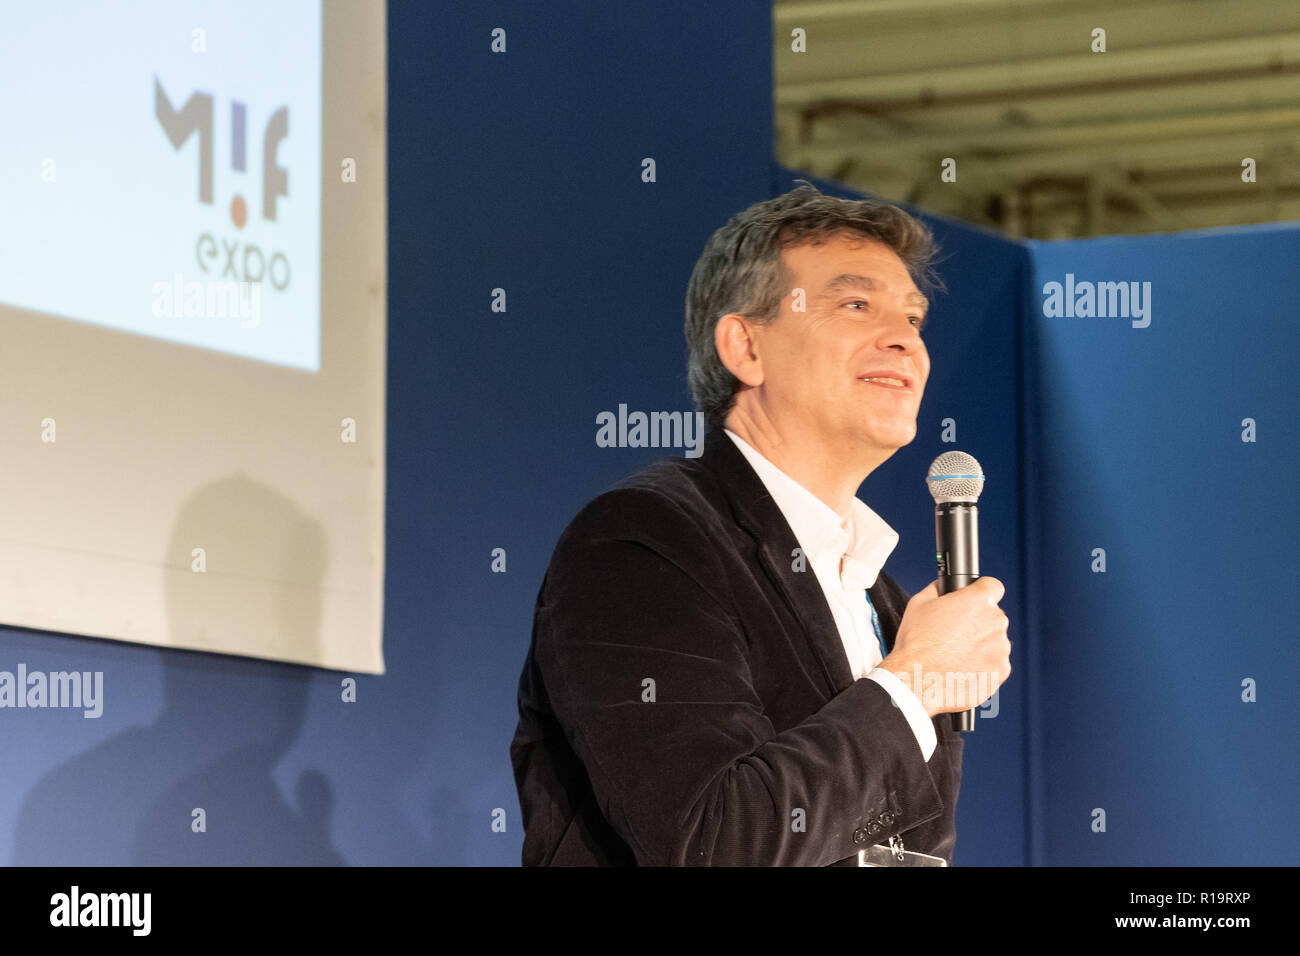 Paris, France. 10 November 2018. Arnaud Montebourg, former French Minister of Industrial Renewal, speaks about globalisation and economic policy during the opening day of MIF Expo, a trade show for products made in France. The exhibition is open from the 10th to the 12th of November. © David Bertho / Alamy Live News Stock Photo